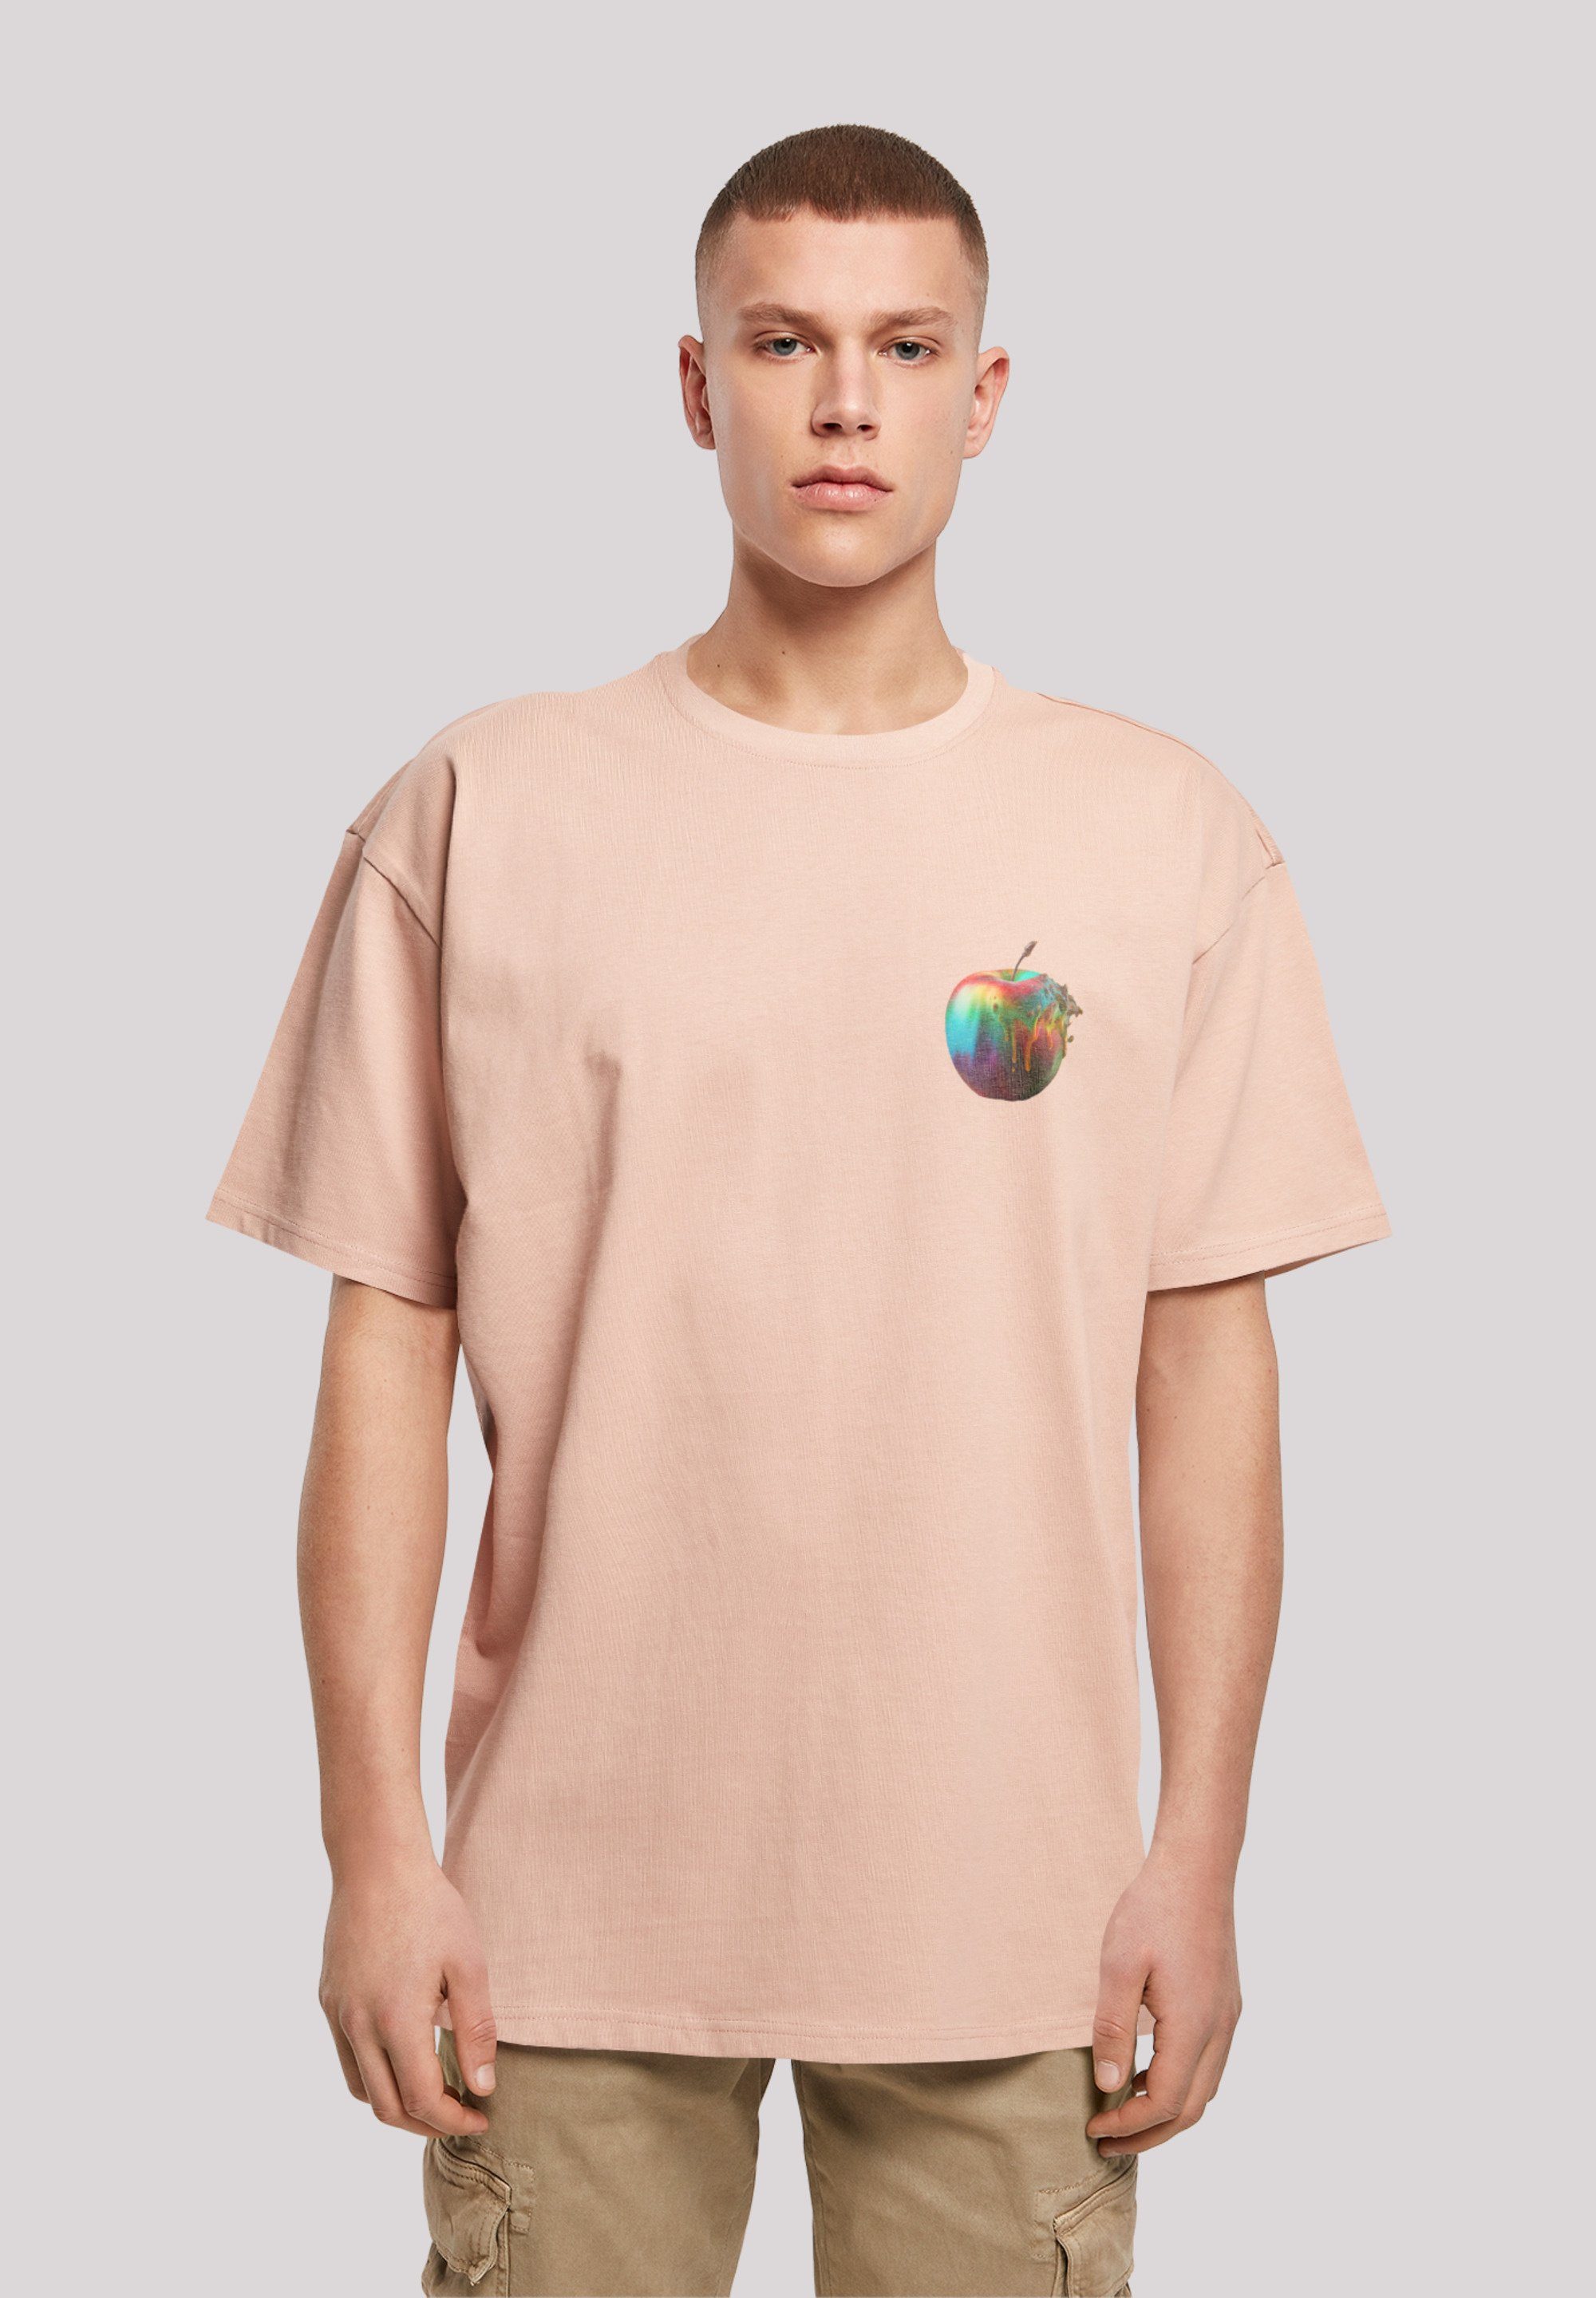 F4NT4STIC T-Shirt Colorfood Collection - Rainbow Apple Print amber